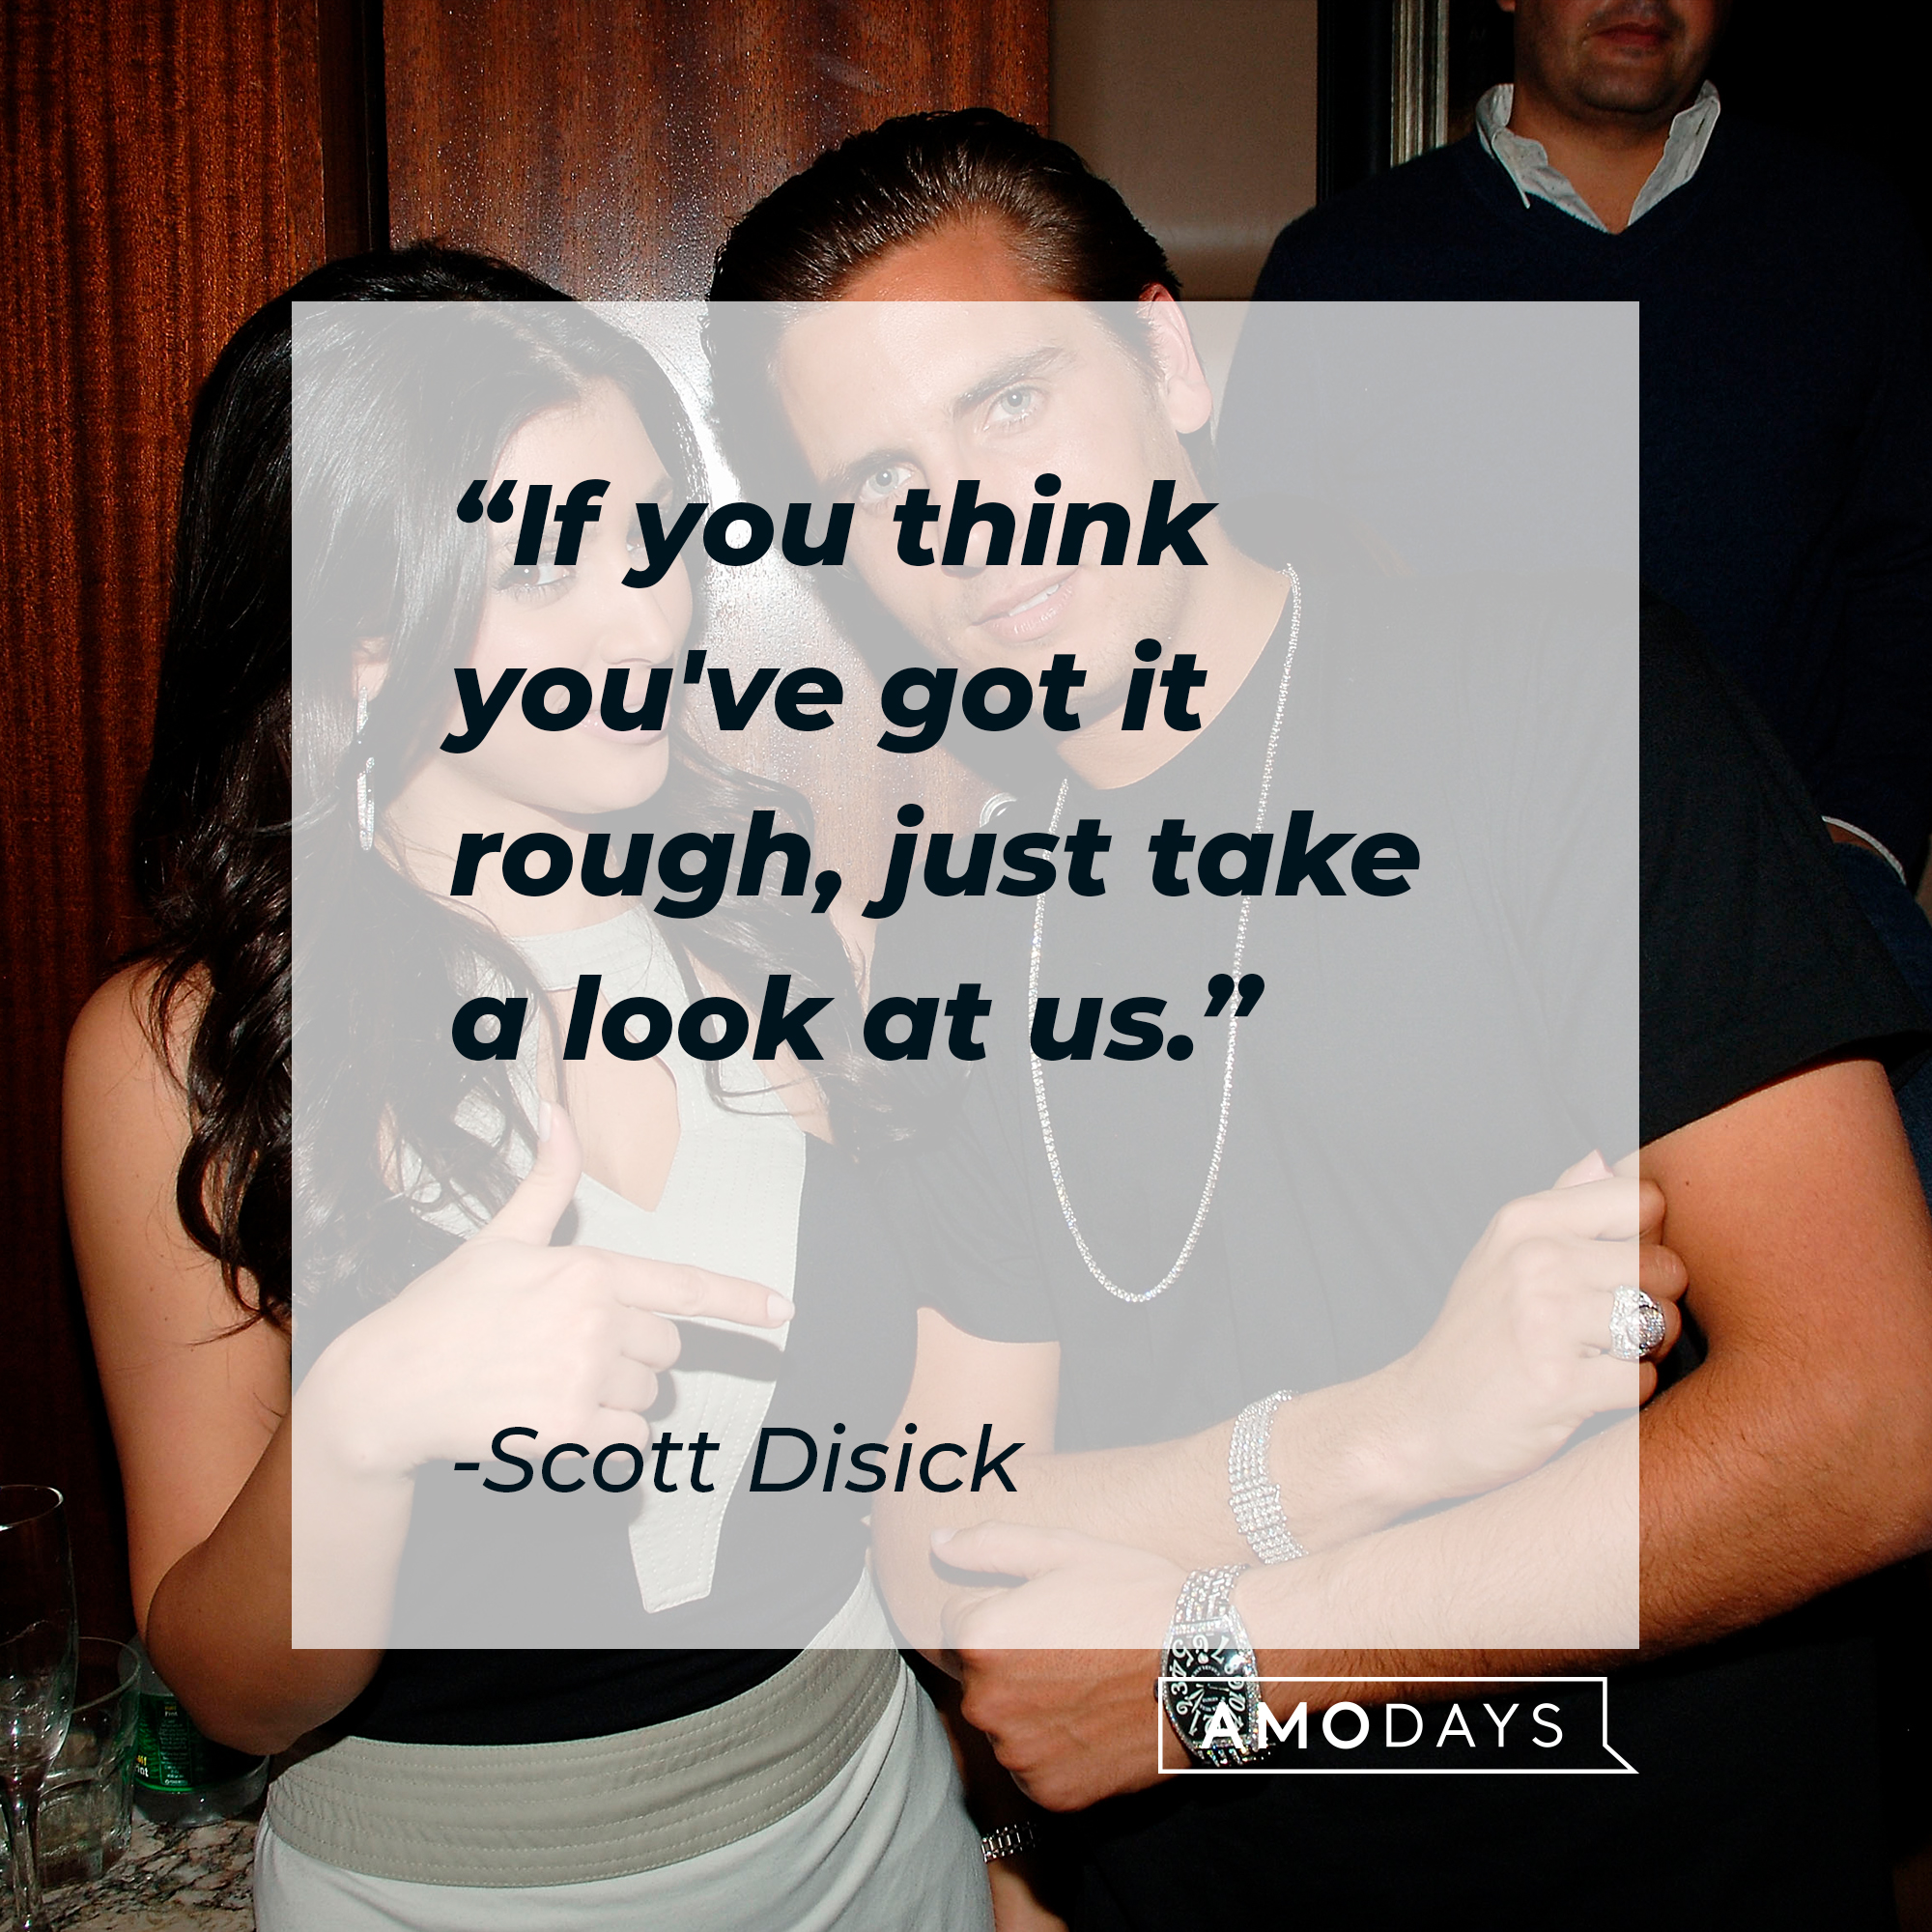 Scott Disick quote: "If you think you've got it rough, just take a look at us." | Source: Getty Images